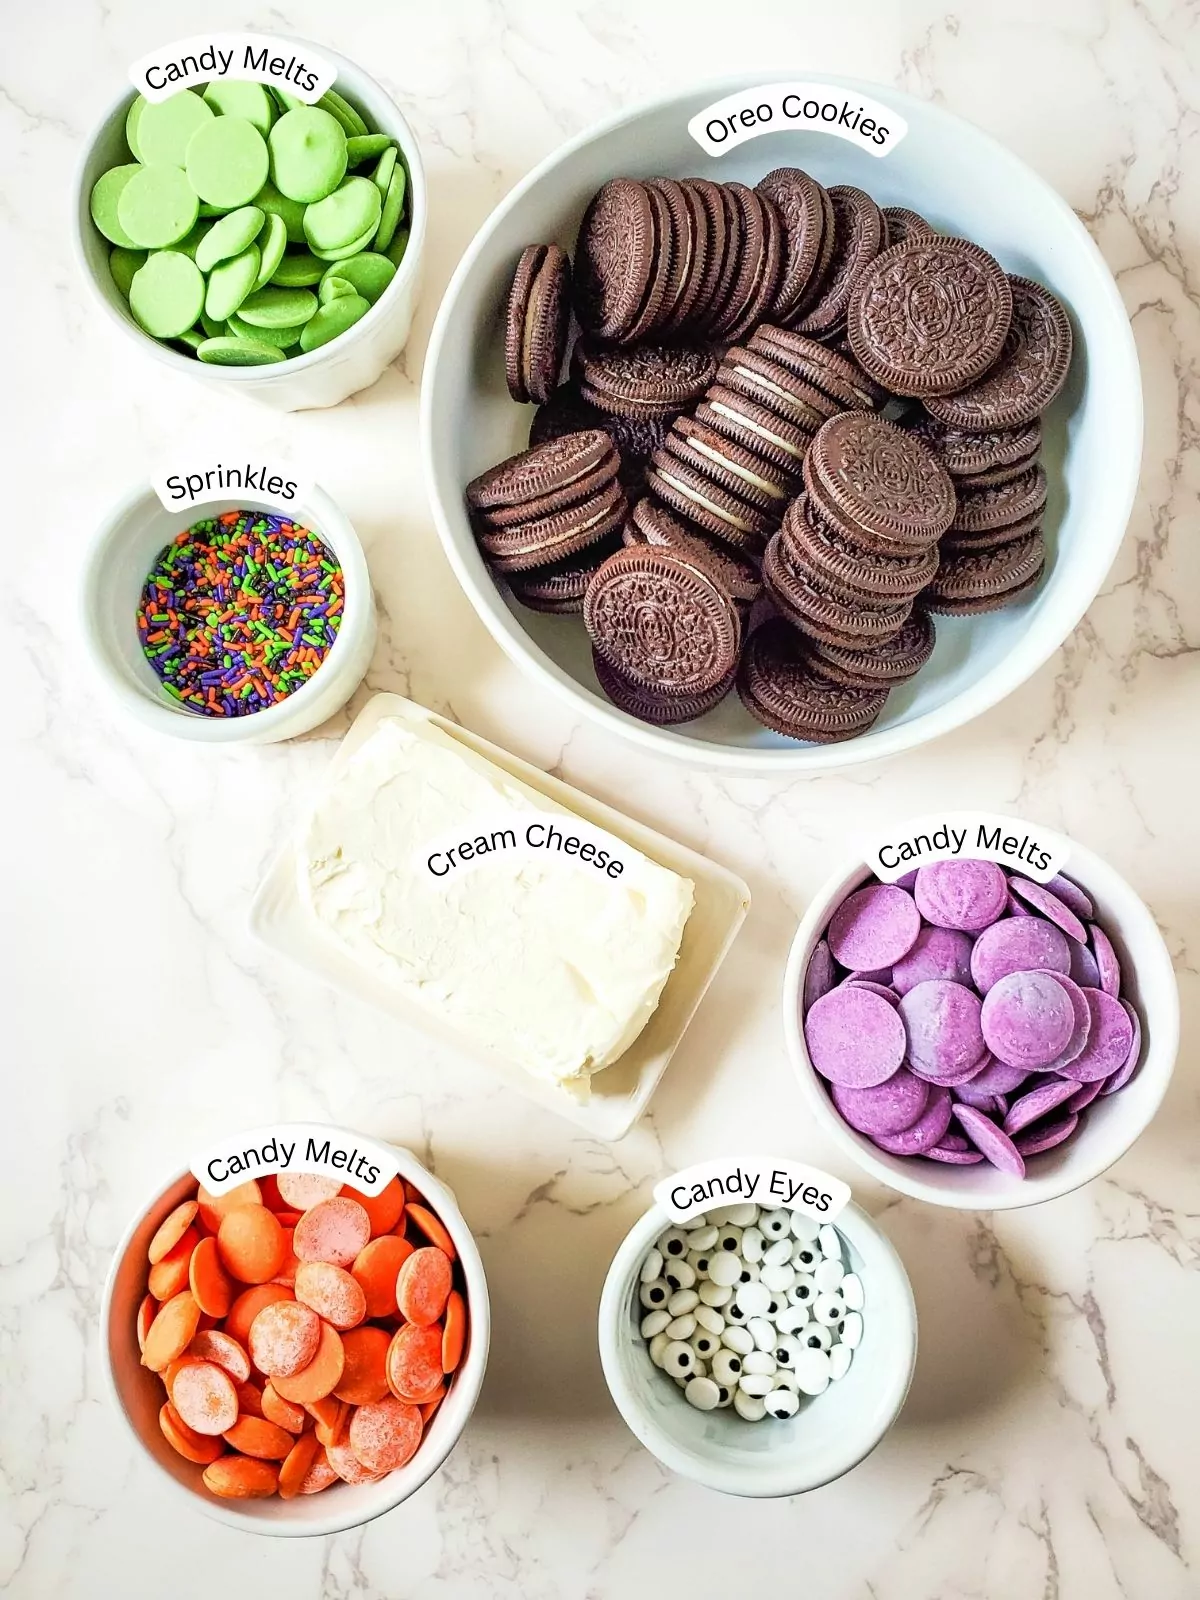 Ingredients for Oreo Cookie Balls.